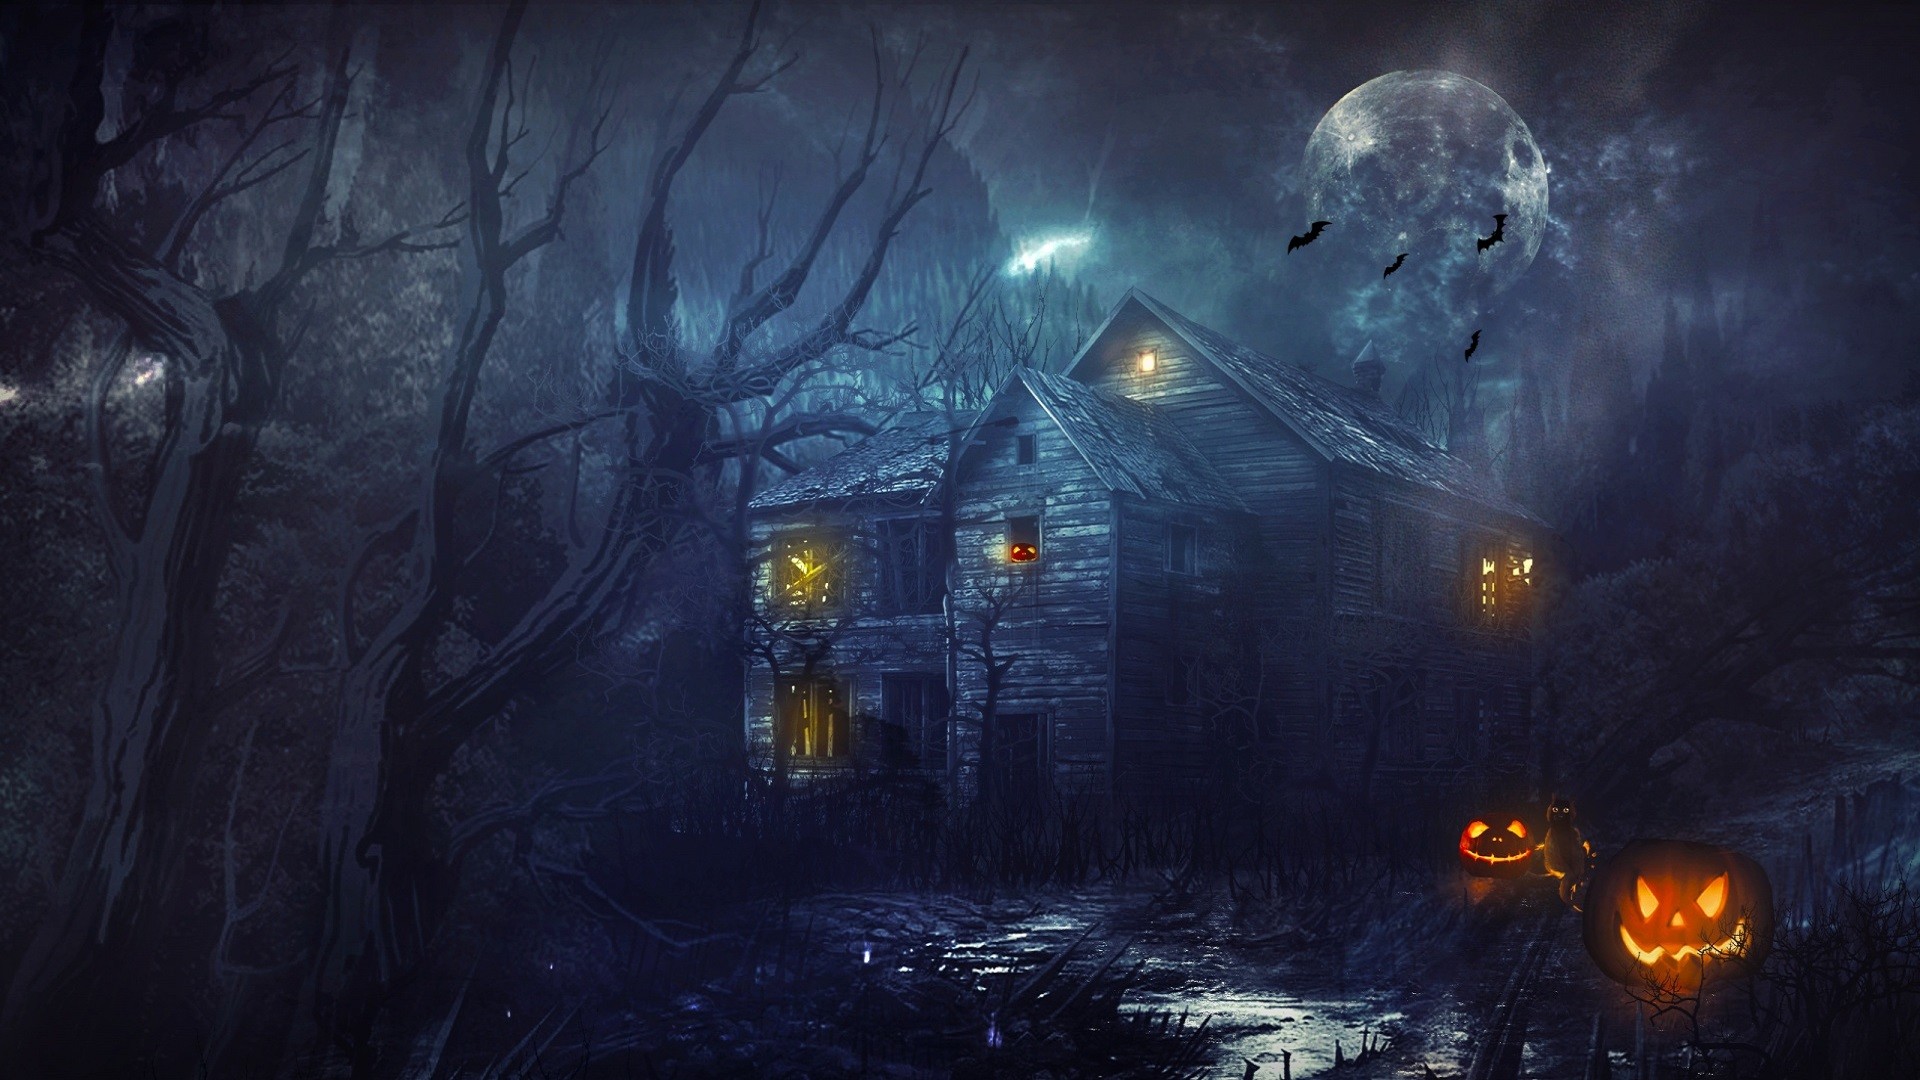 1920x1080 Wallpaper Details. File Name: Scary Halloween Background ...